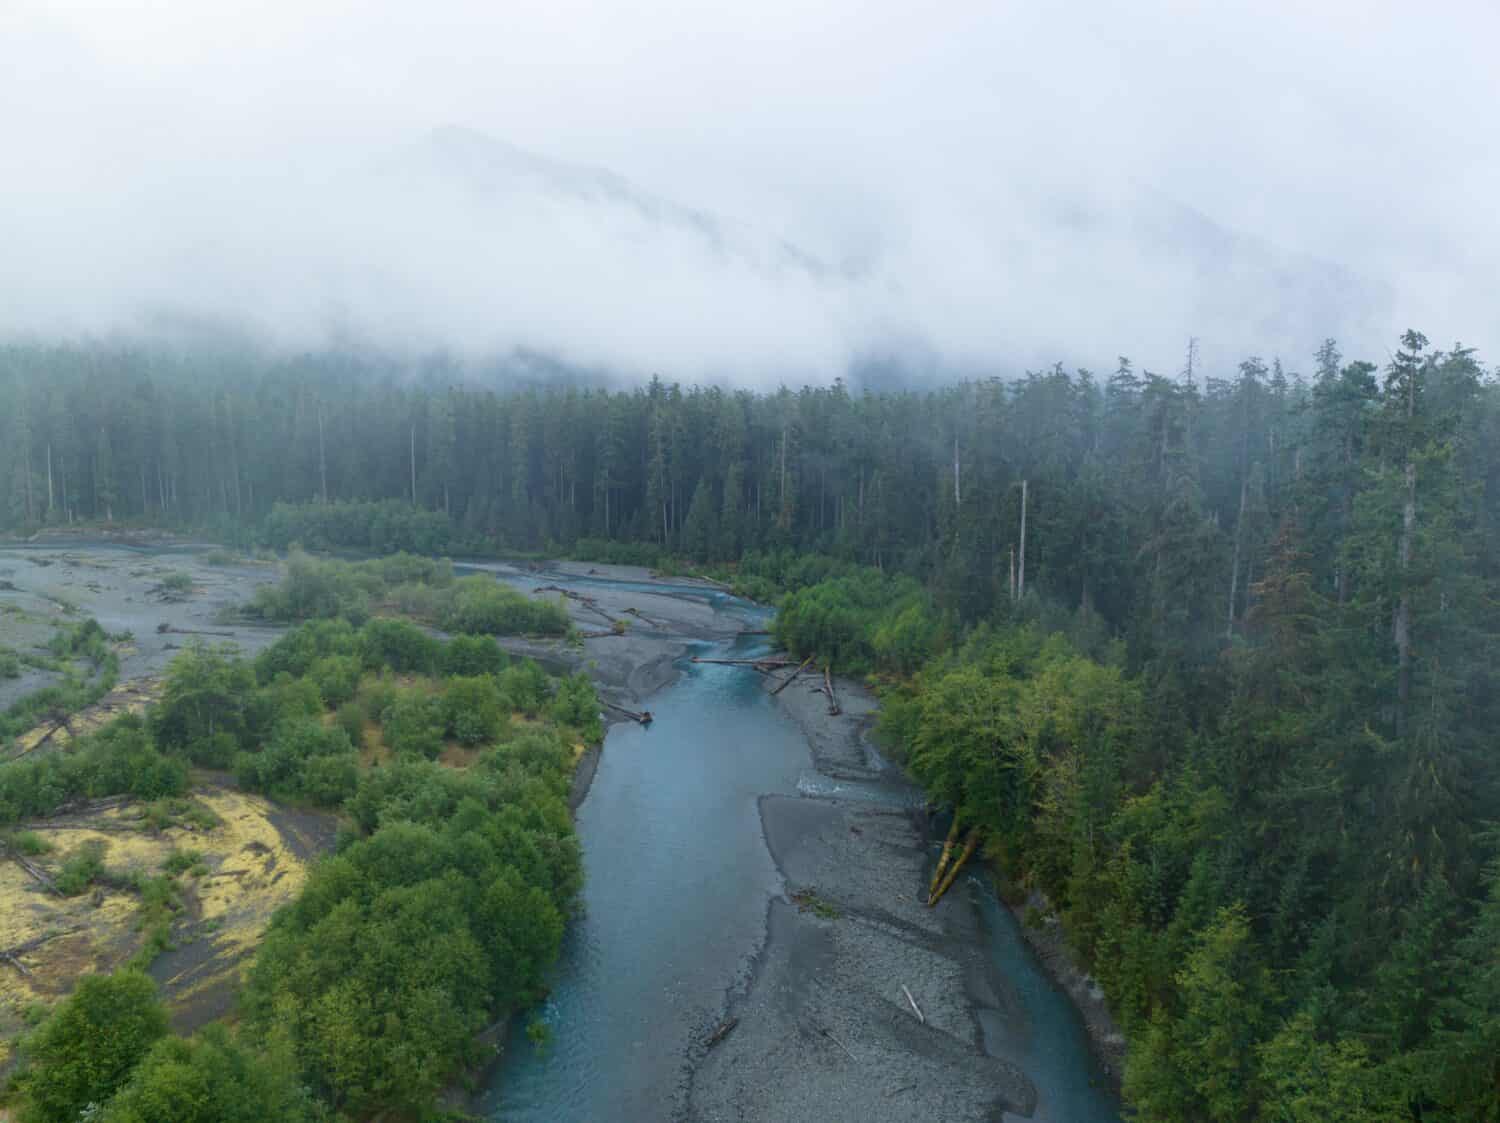 Located on the Olympic Peninsula, the Hoh river flows through one of the largest temperate rainforests in the U.S. Receiving over 100 inches of rain annually, the region is lush with flora and fauna.